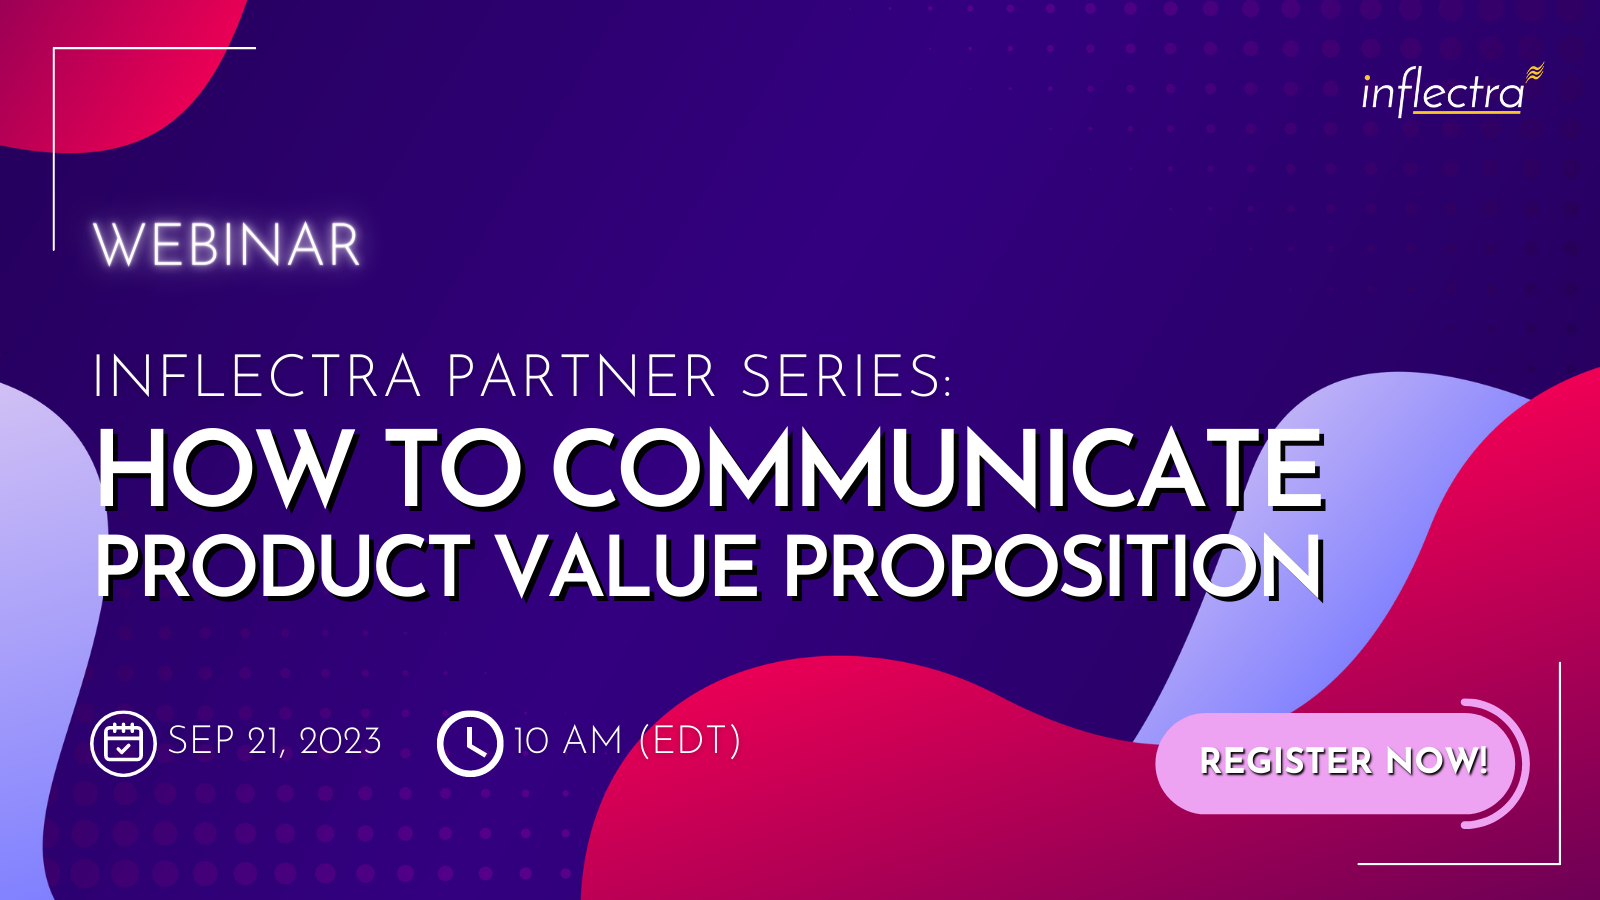 inflectra-webinar-partner-series-how-to-communicate-product-value-proposition-image